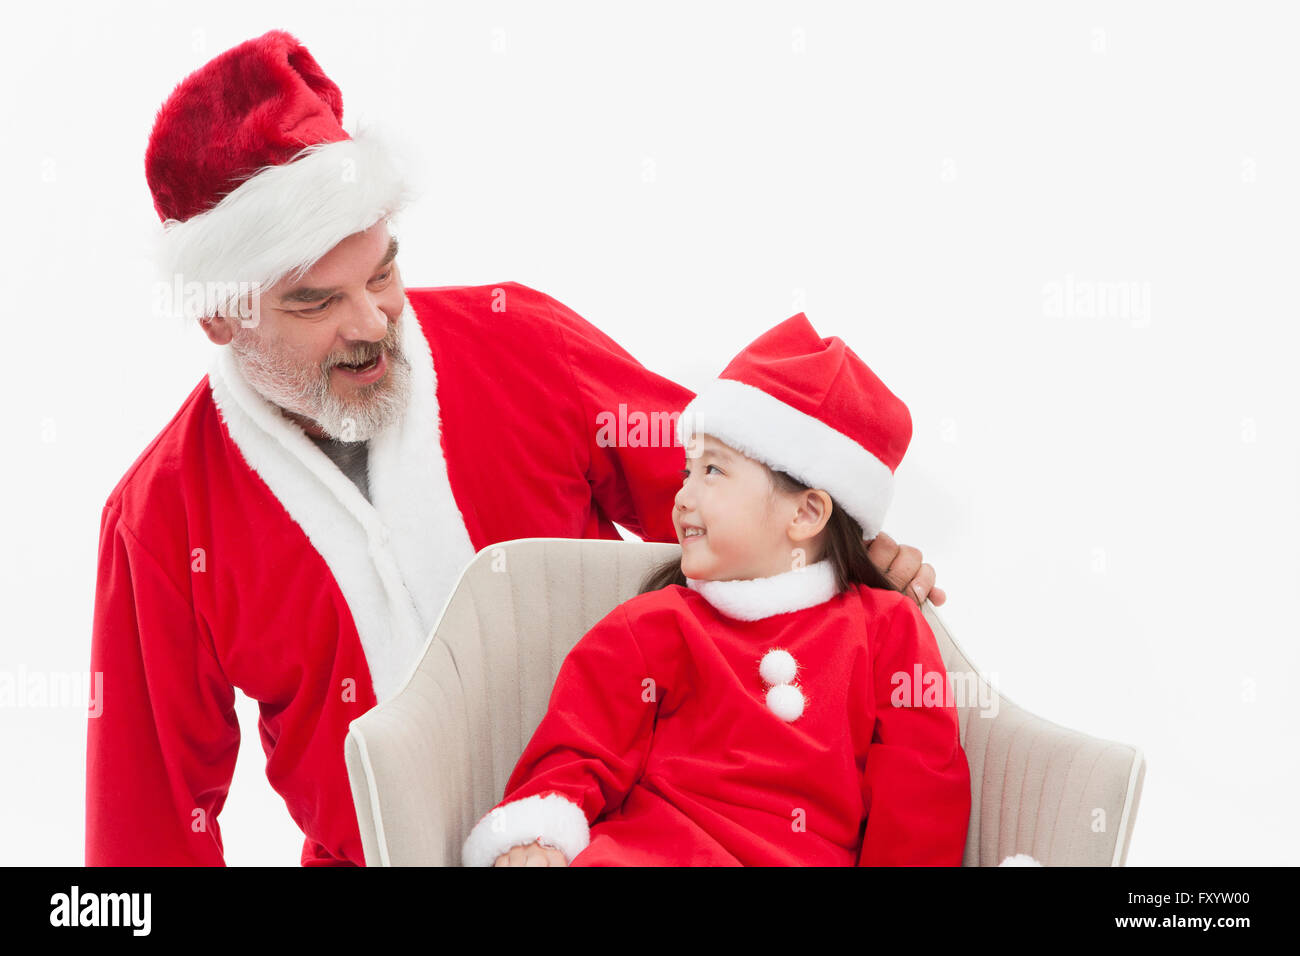 Portrait of Smiling Santa Claus and girl face to face Stock Photo